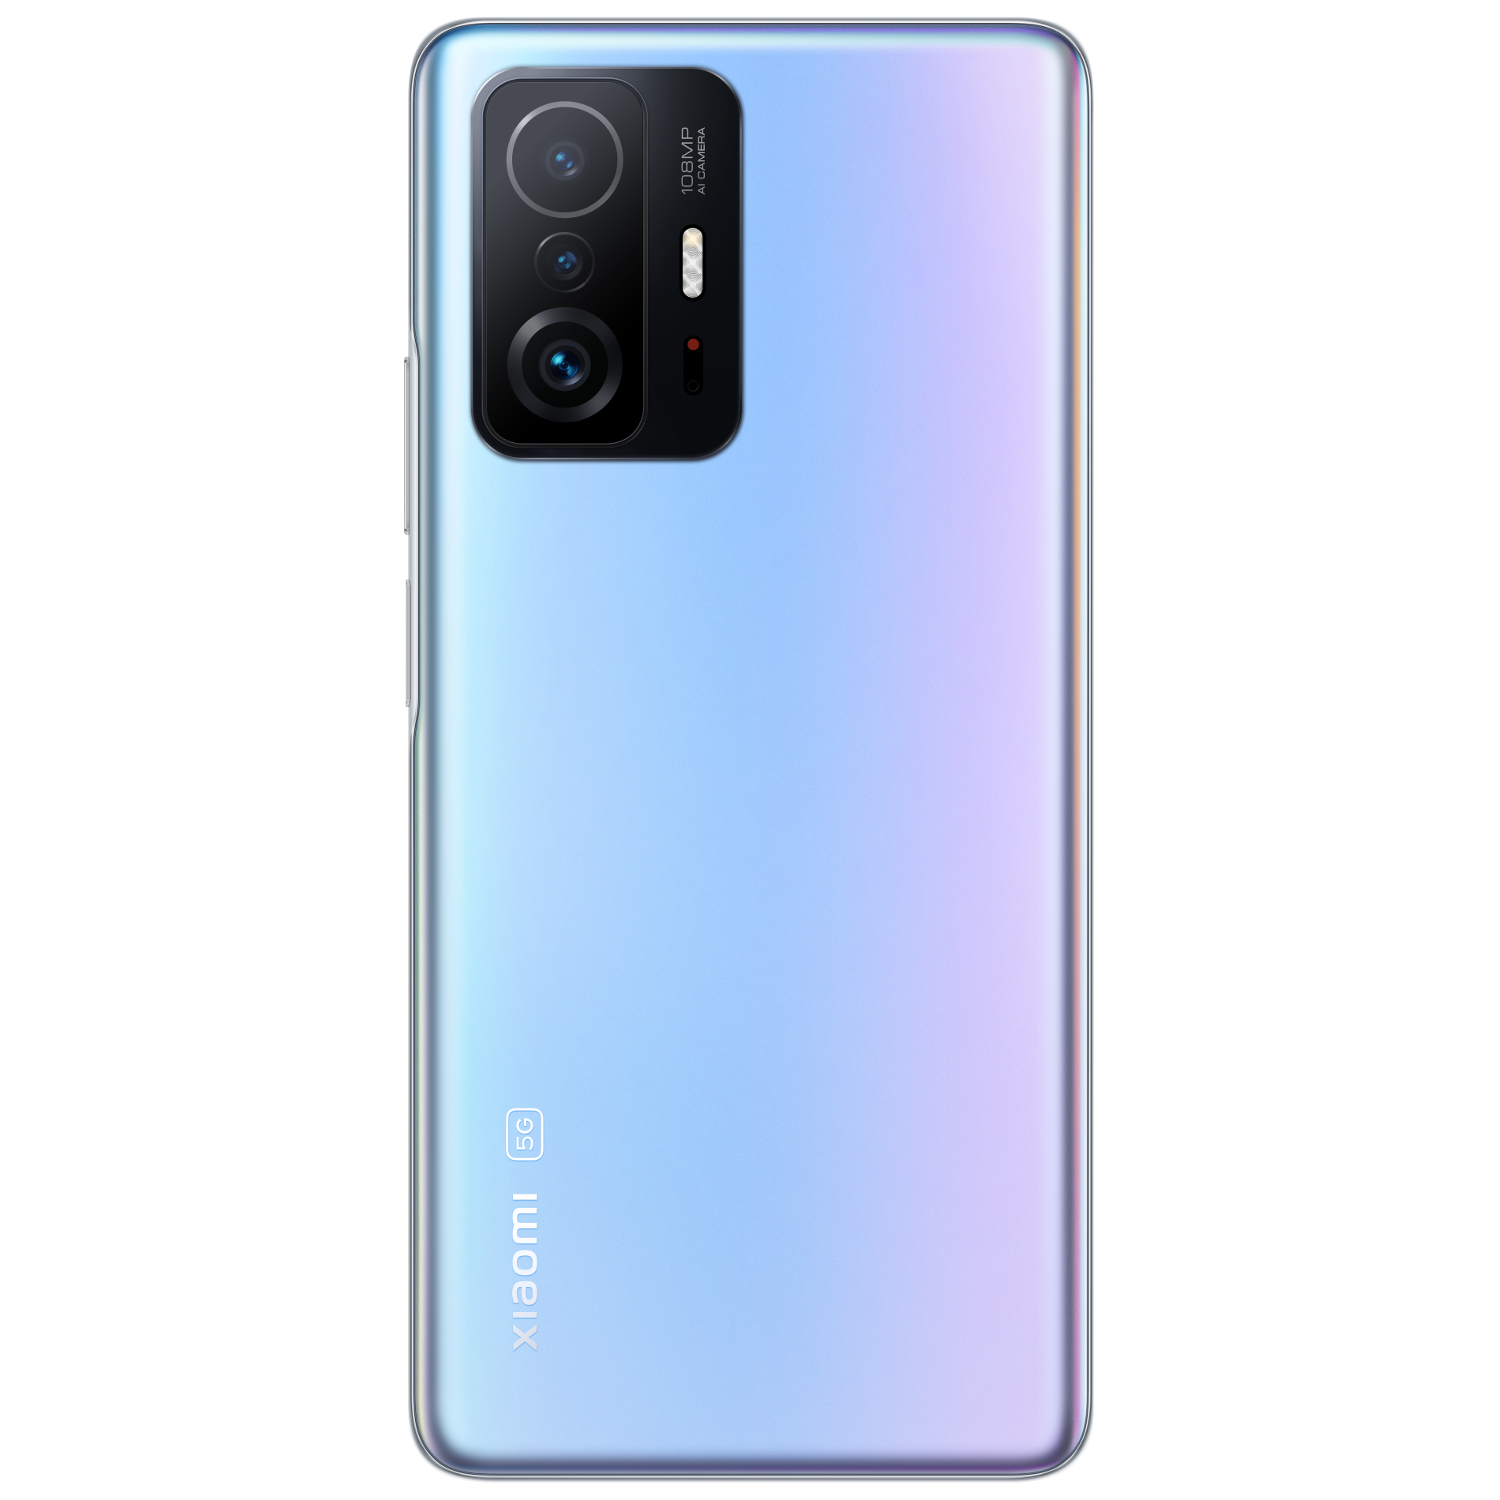 Find Xiaomi 11T Pro Global Version 120W Fast Charge 108MP Triple Camera 8GB 128GB Snapdragon 888 6 67 inch 120Hz AMOLED NFC Octa Core 5G Smartphone for Sale on Gipsybee.com with cryptocurrencies